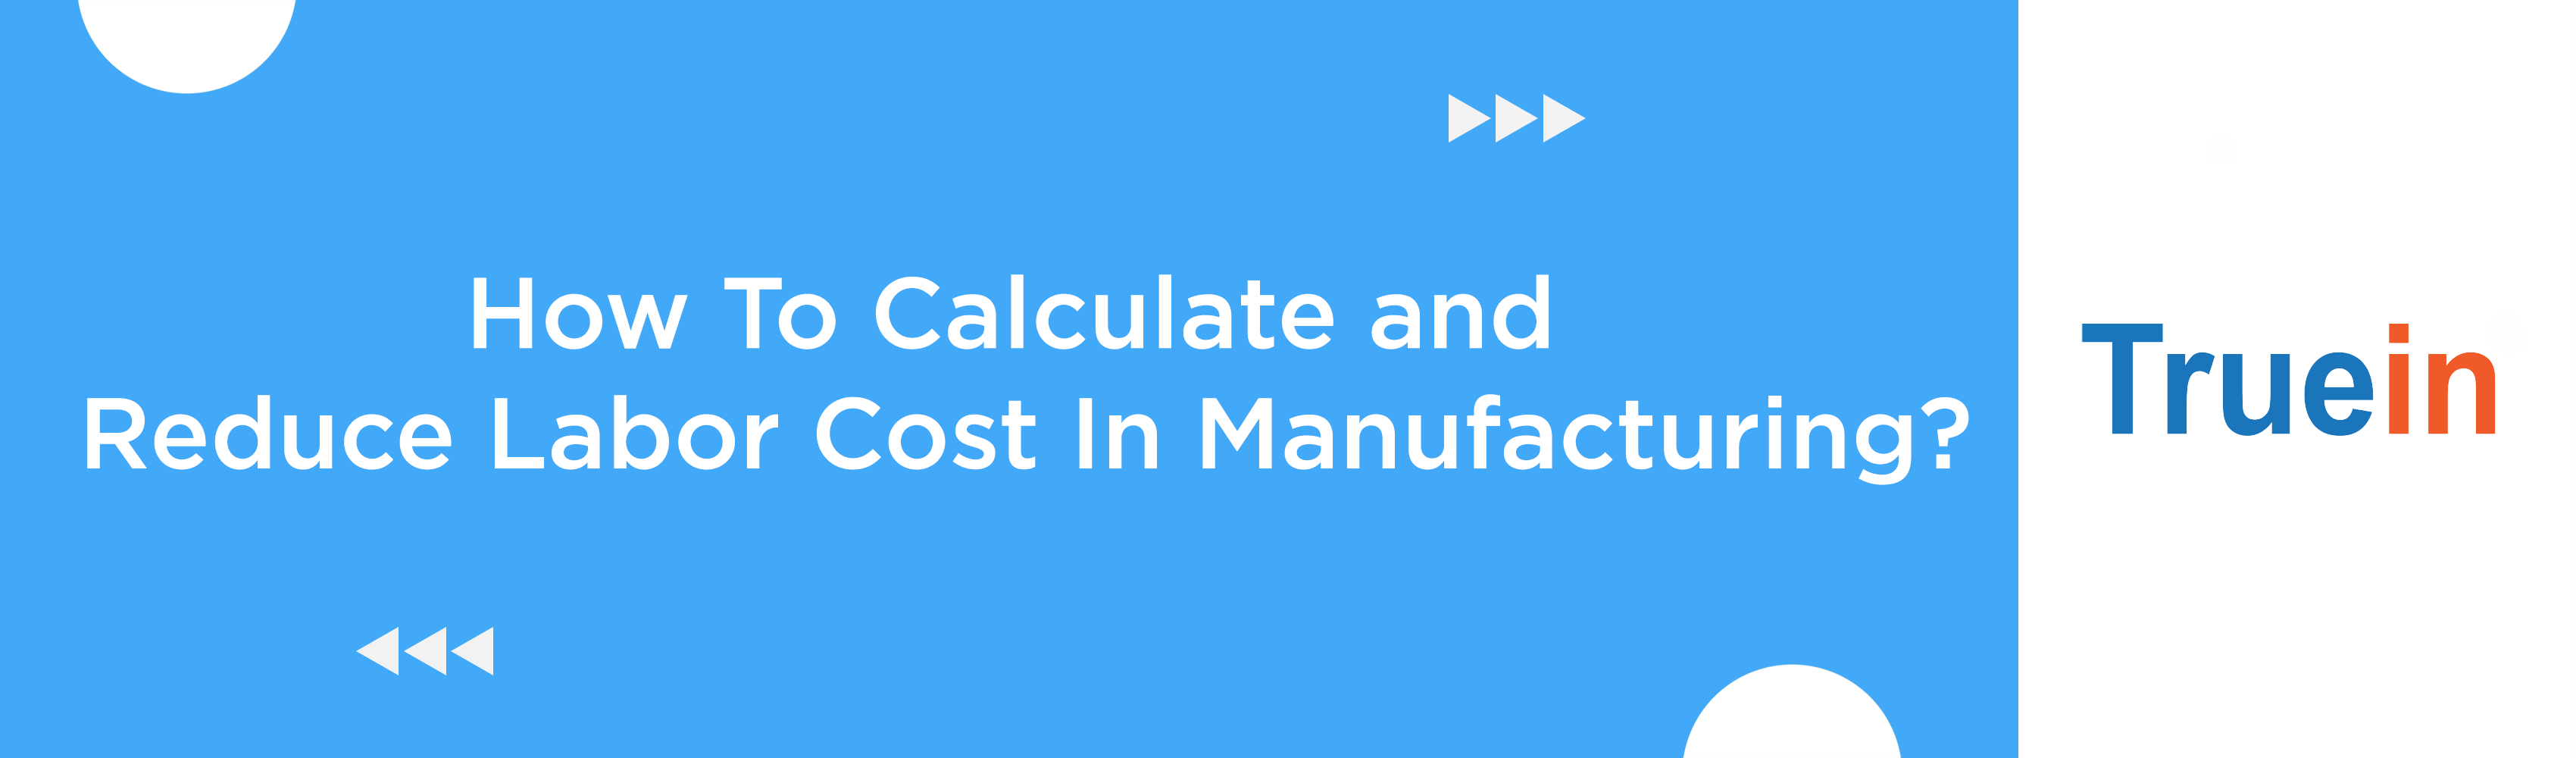 How To Calculate Labor Cost In Manufacturing?